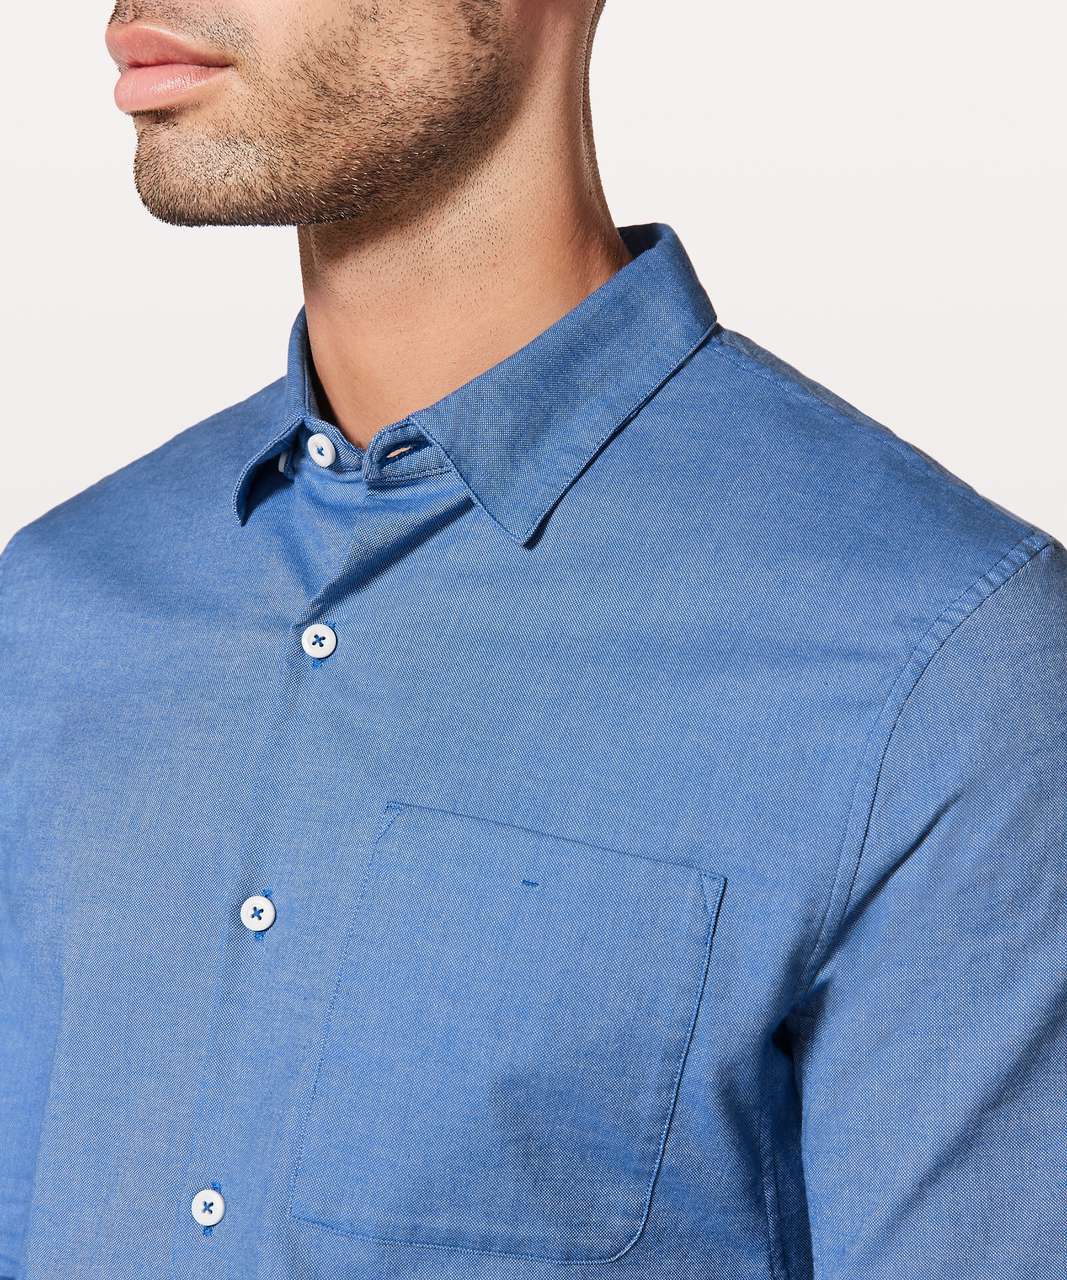 Lululemon All Town Buttondown - White / Harbor Blue (First Release)